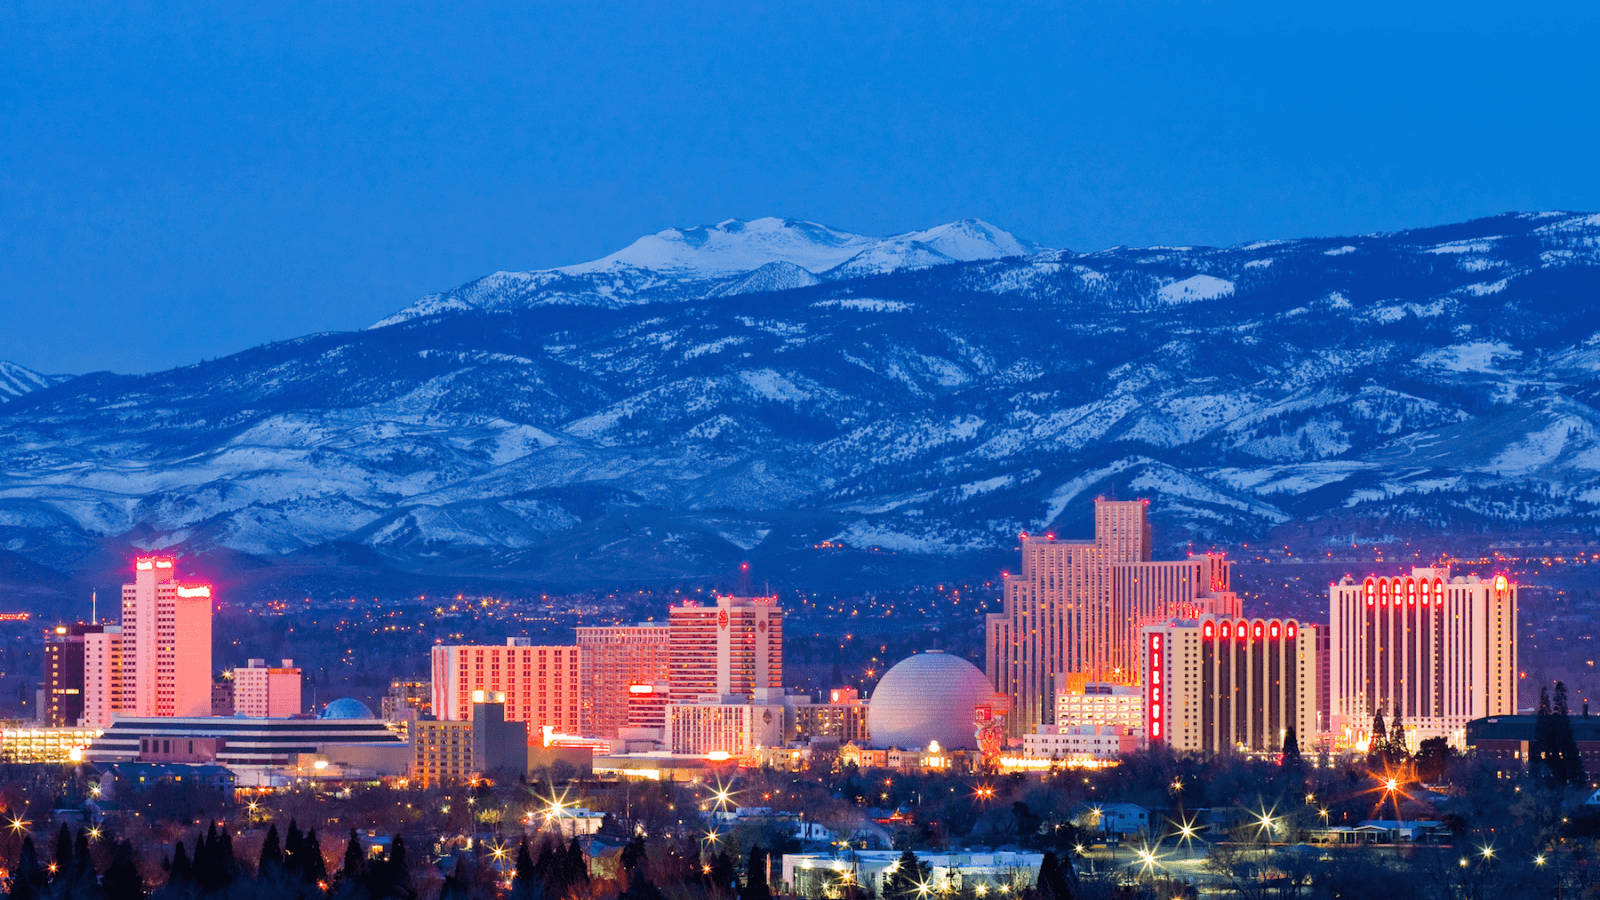 A Scenic Skyline Of Reno, Nevada, With The Sierra Nevada Range In The Backdrop